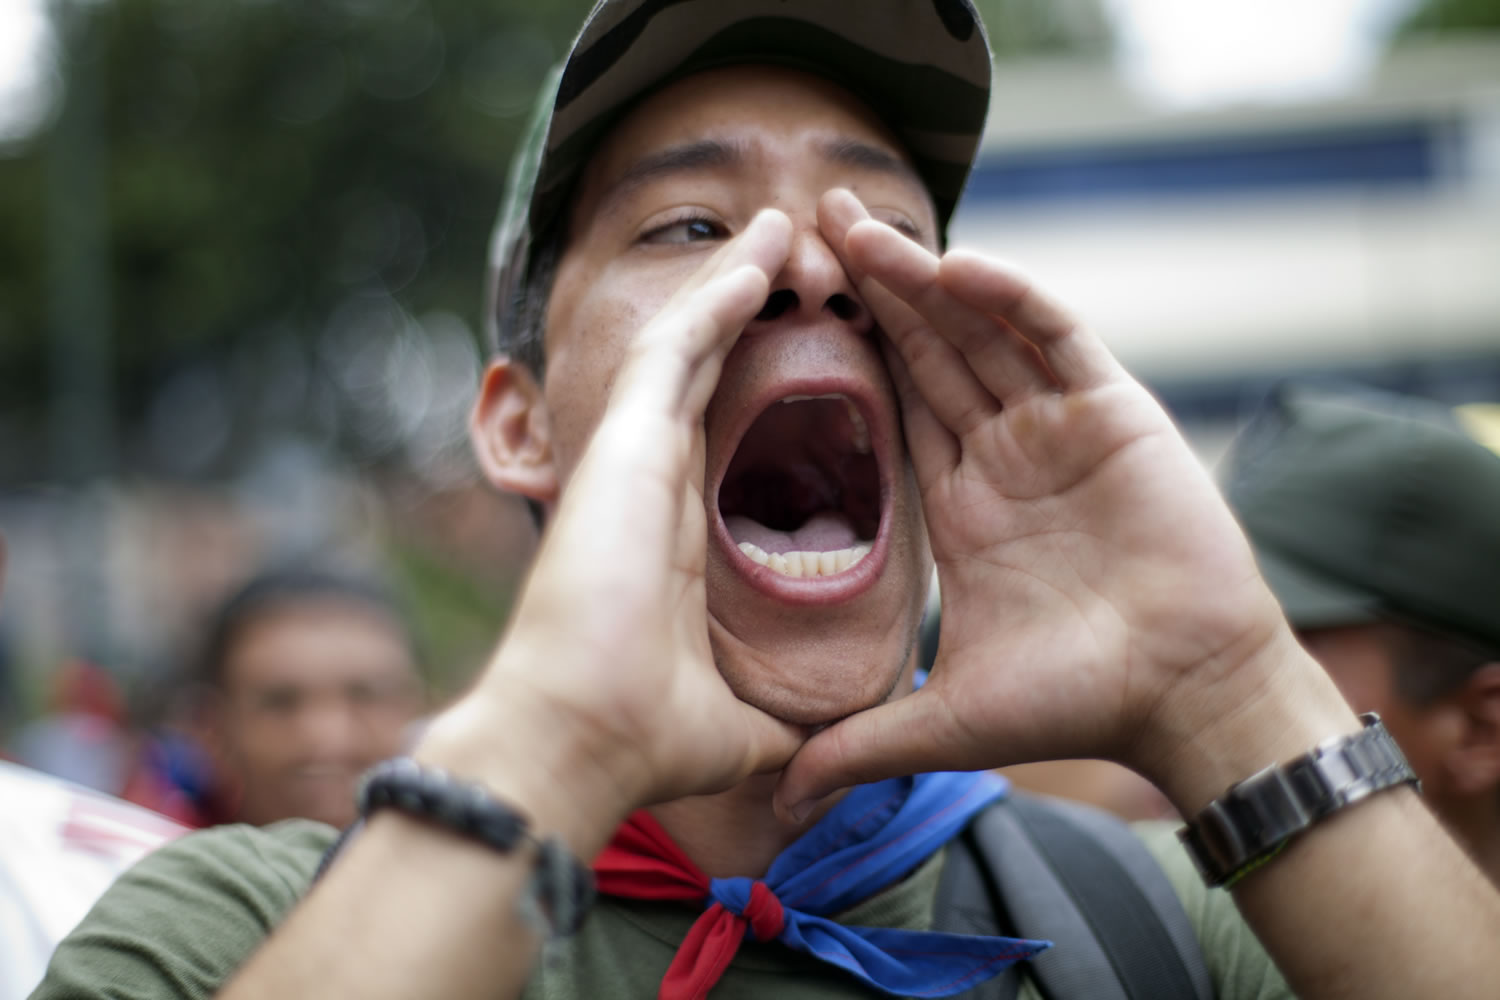 A Chavista demonstrator shouts as supporters of President-elect Nicolas Maduro march in front of the National Electoral Council in Caracas, Venezuela, on Wednesday.